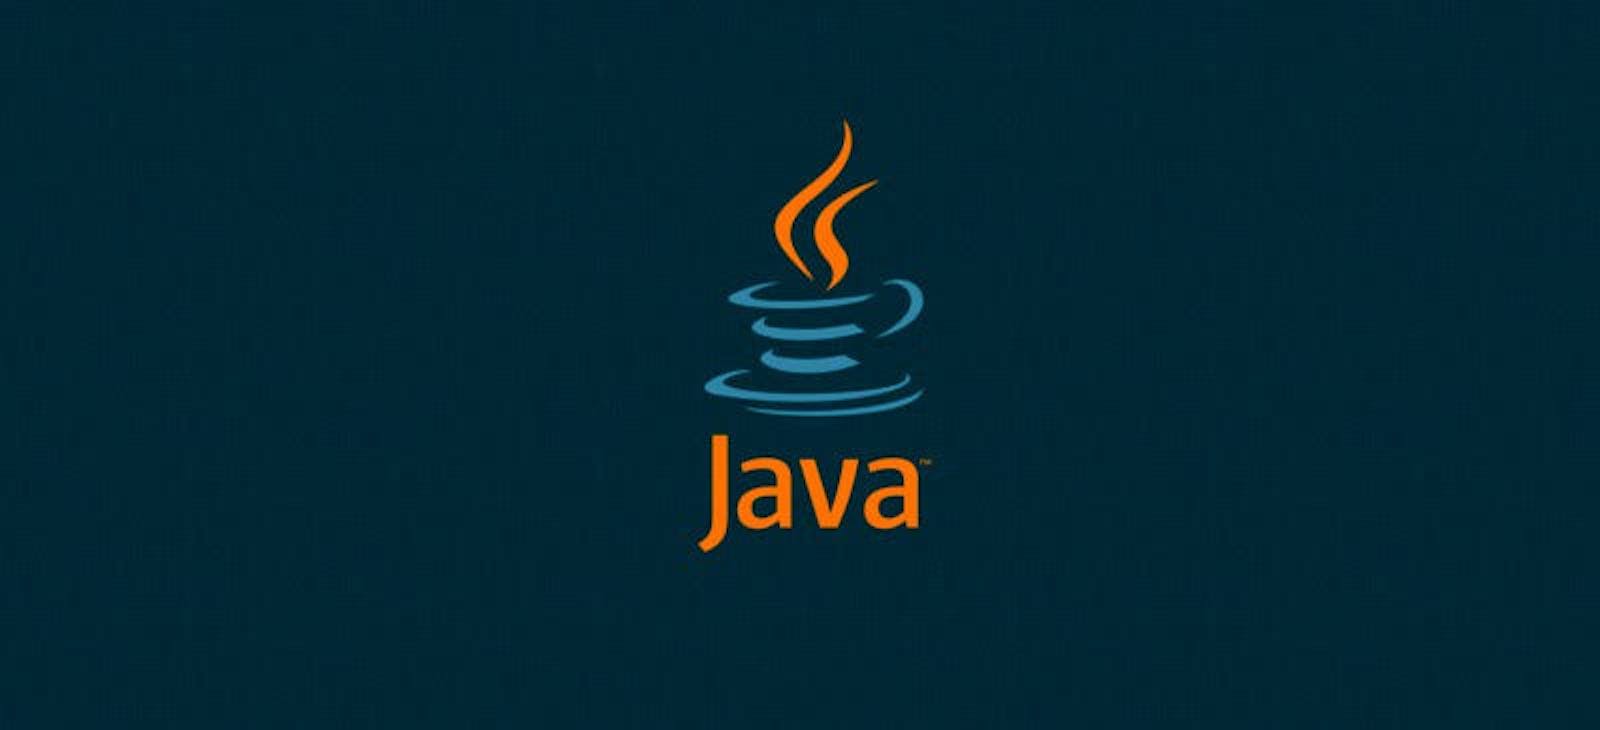 DAY 1 : My First Day Learning Java